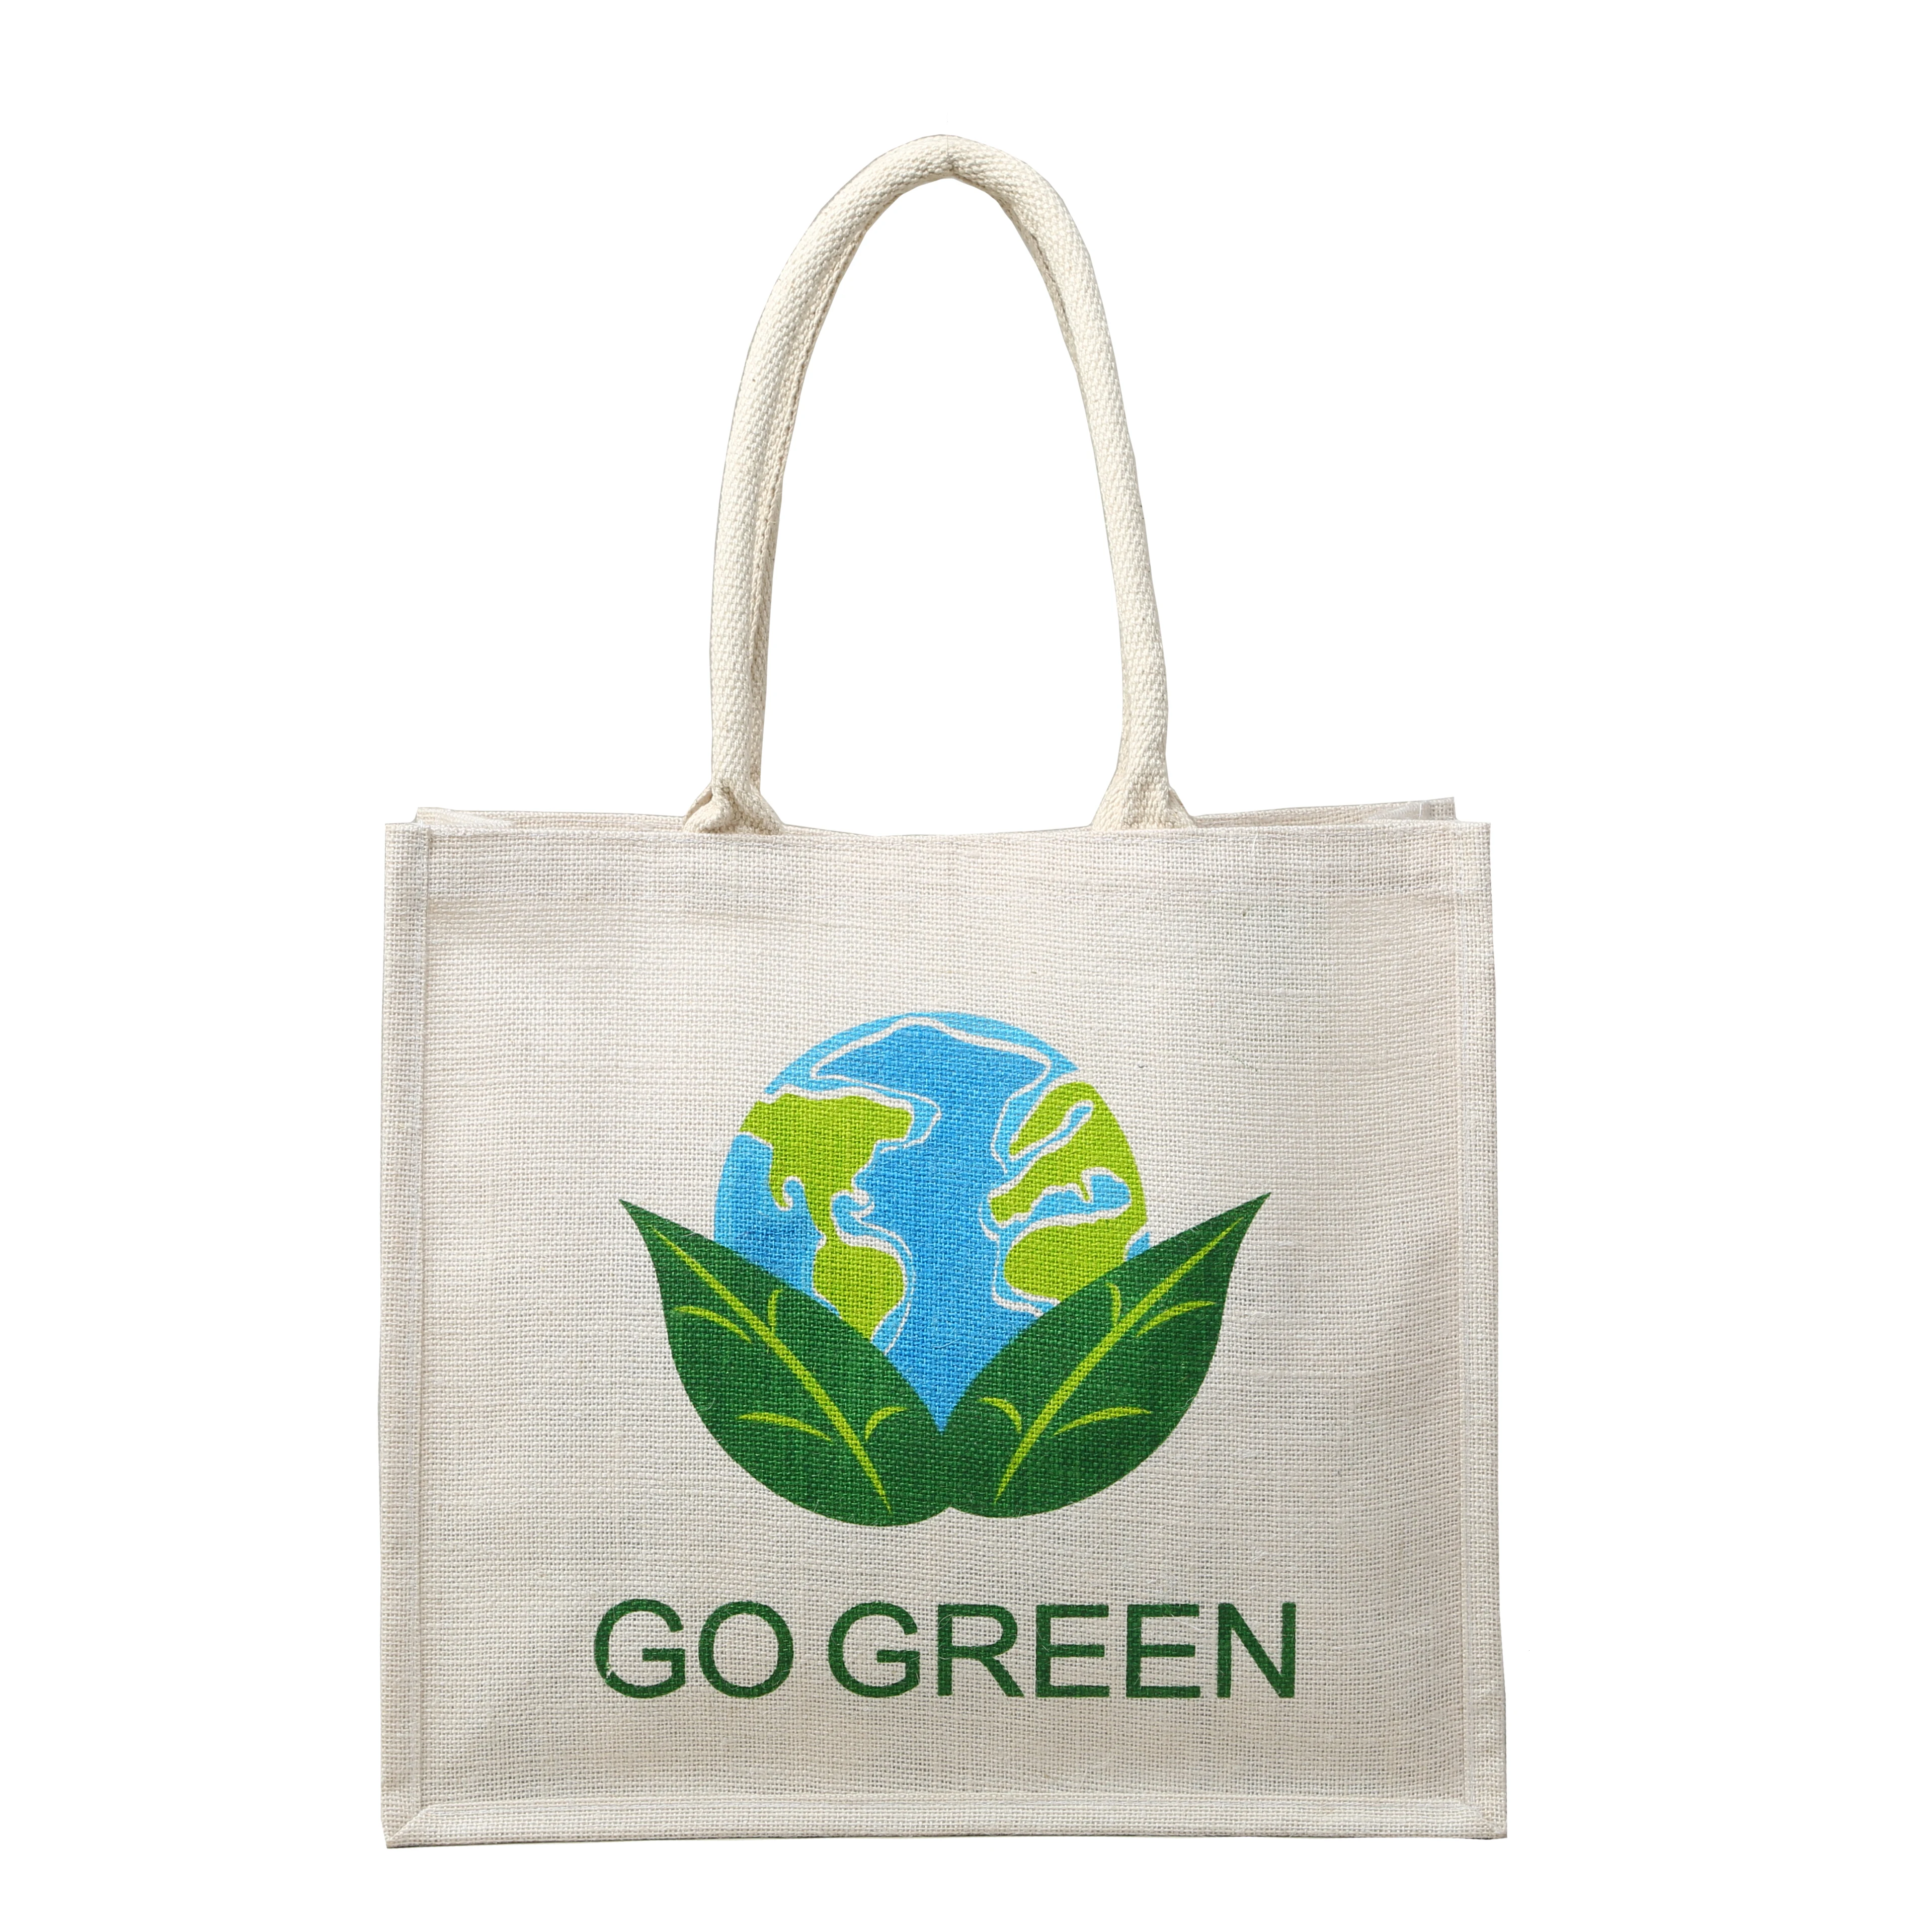 Source Grocery Shopping Tote Bag Custom Go Green logo jute cotton tote bag  our certification ISO 9001-2015 ISO 14001-2015 SA 8000-2014 on m.